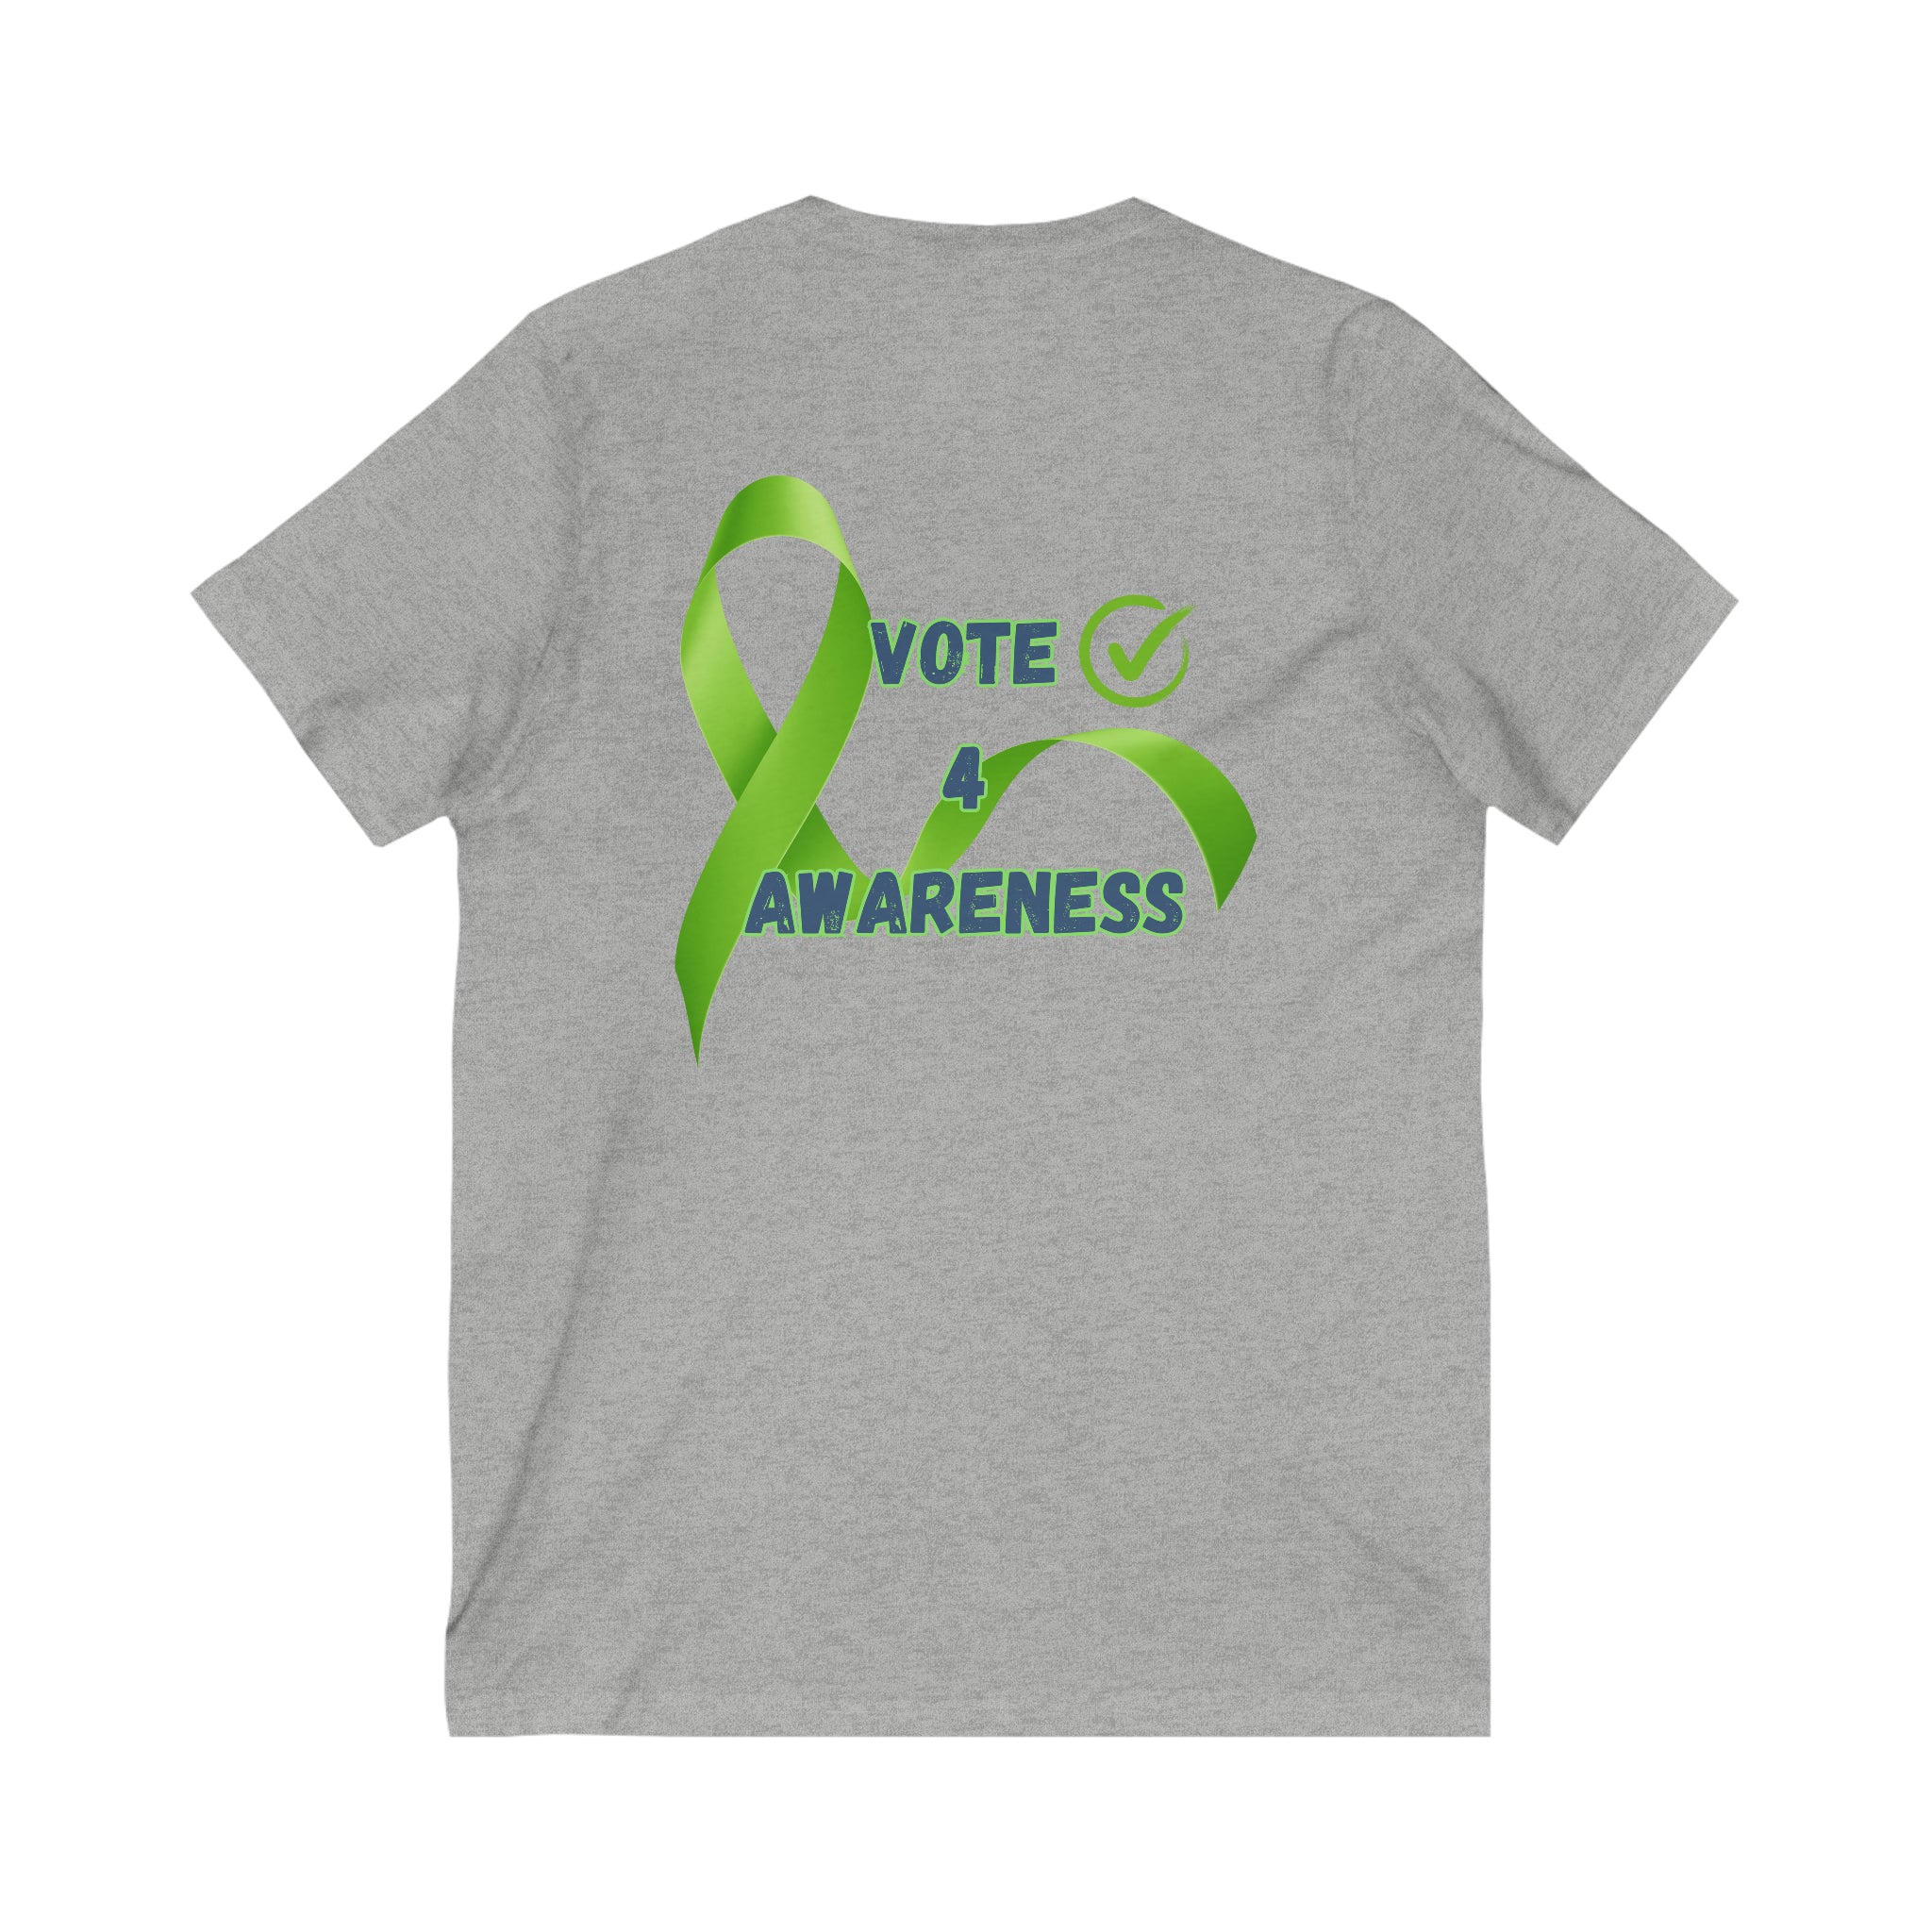 Vote 4 Awareness V-Neck T-Shirt Athletic Heather Basic T-Shirt Casual Shirt Classic Tee Comfortable Tee Cotton T-Shirt Everyday Wear Graphic Tee Statement Shirt T-shirt Tee Collection Tee for all Tee for Men Tee for Women Unisex Apparel Vintage Tee V-neck 5715952653451711539_2048 Printify